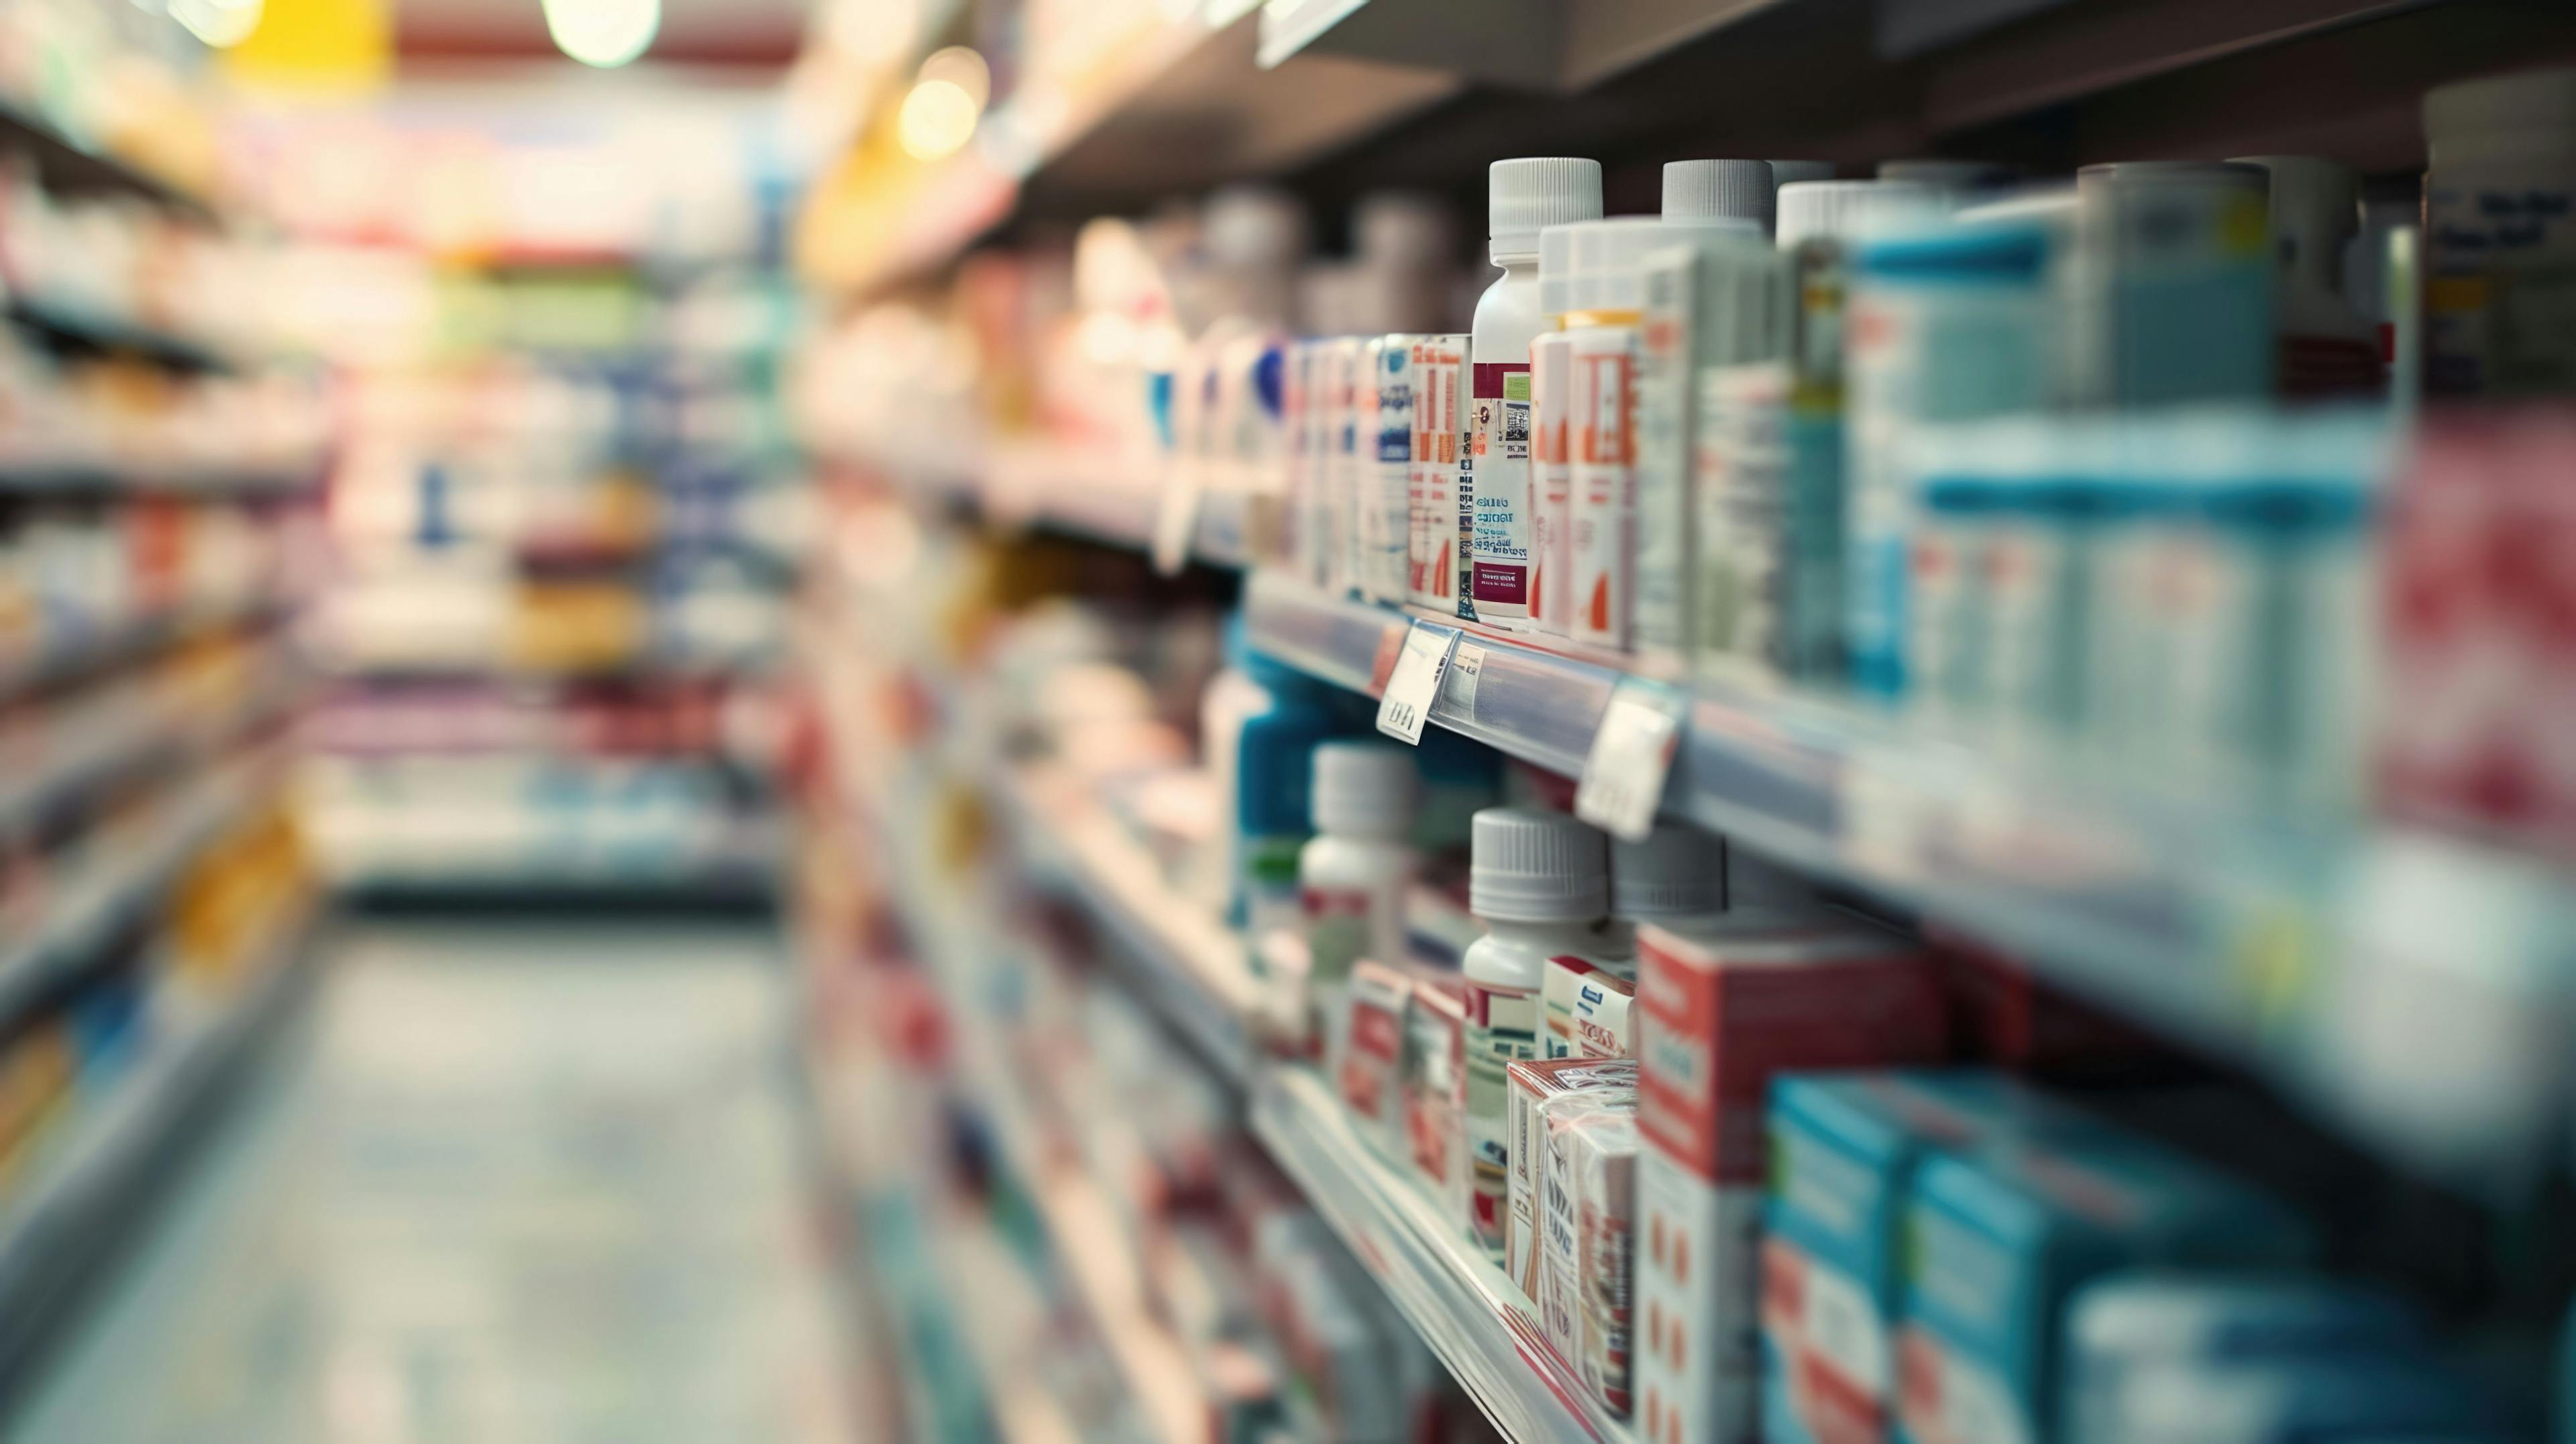 OTC products in a pharmacy. | Image credit: MP Studio - stock.adobe.com